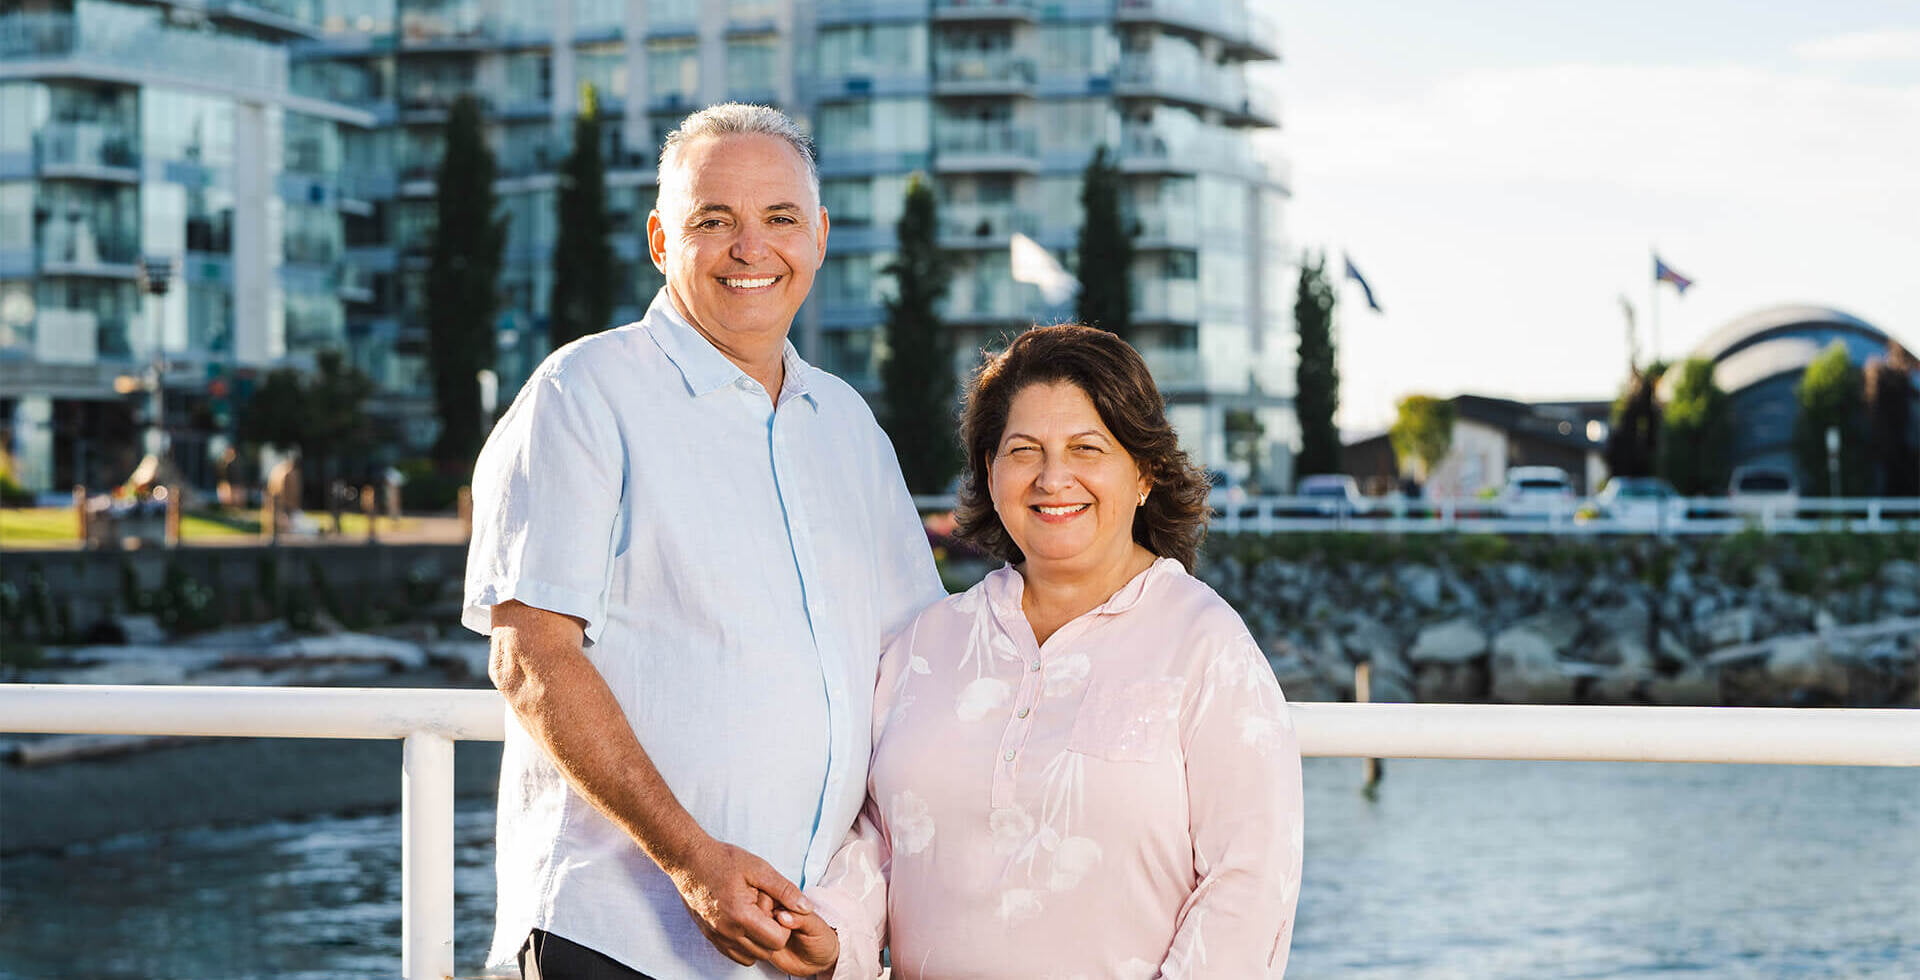 Tony and Anna Clemente standing together on the ocean walkway in Sidney on a sunny day